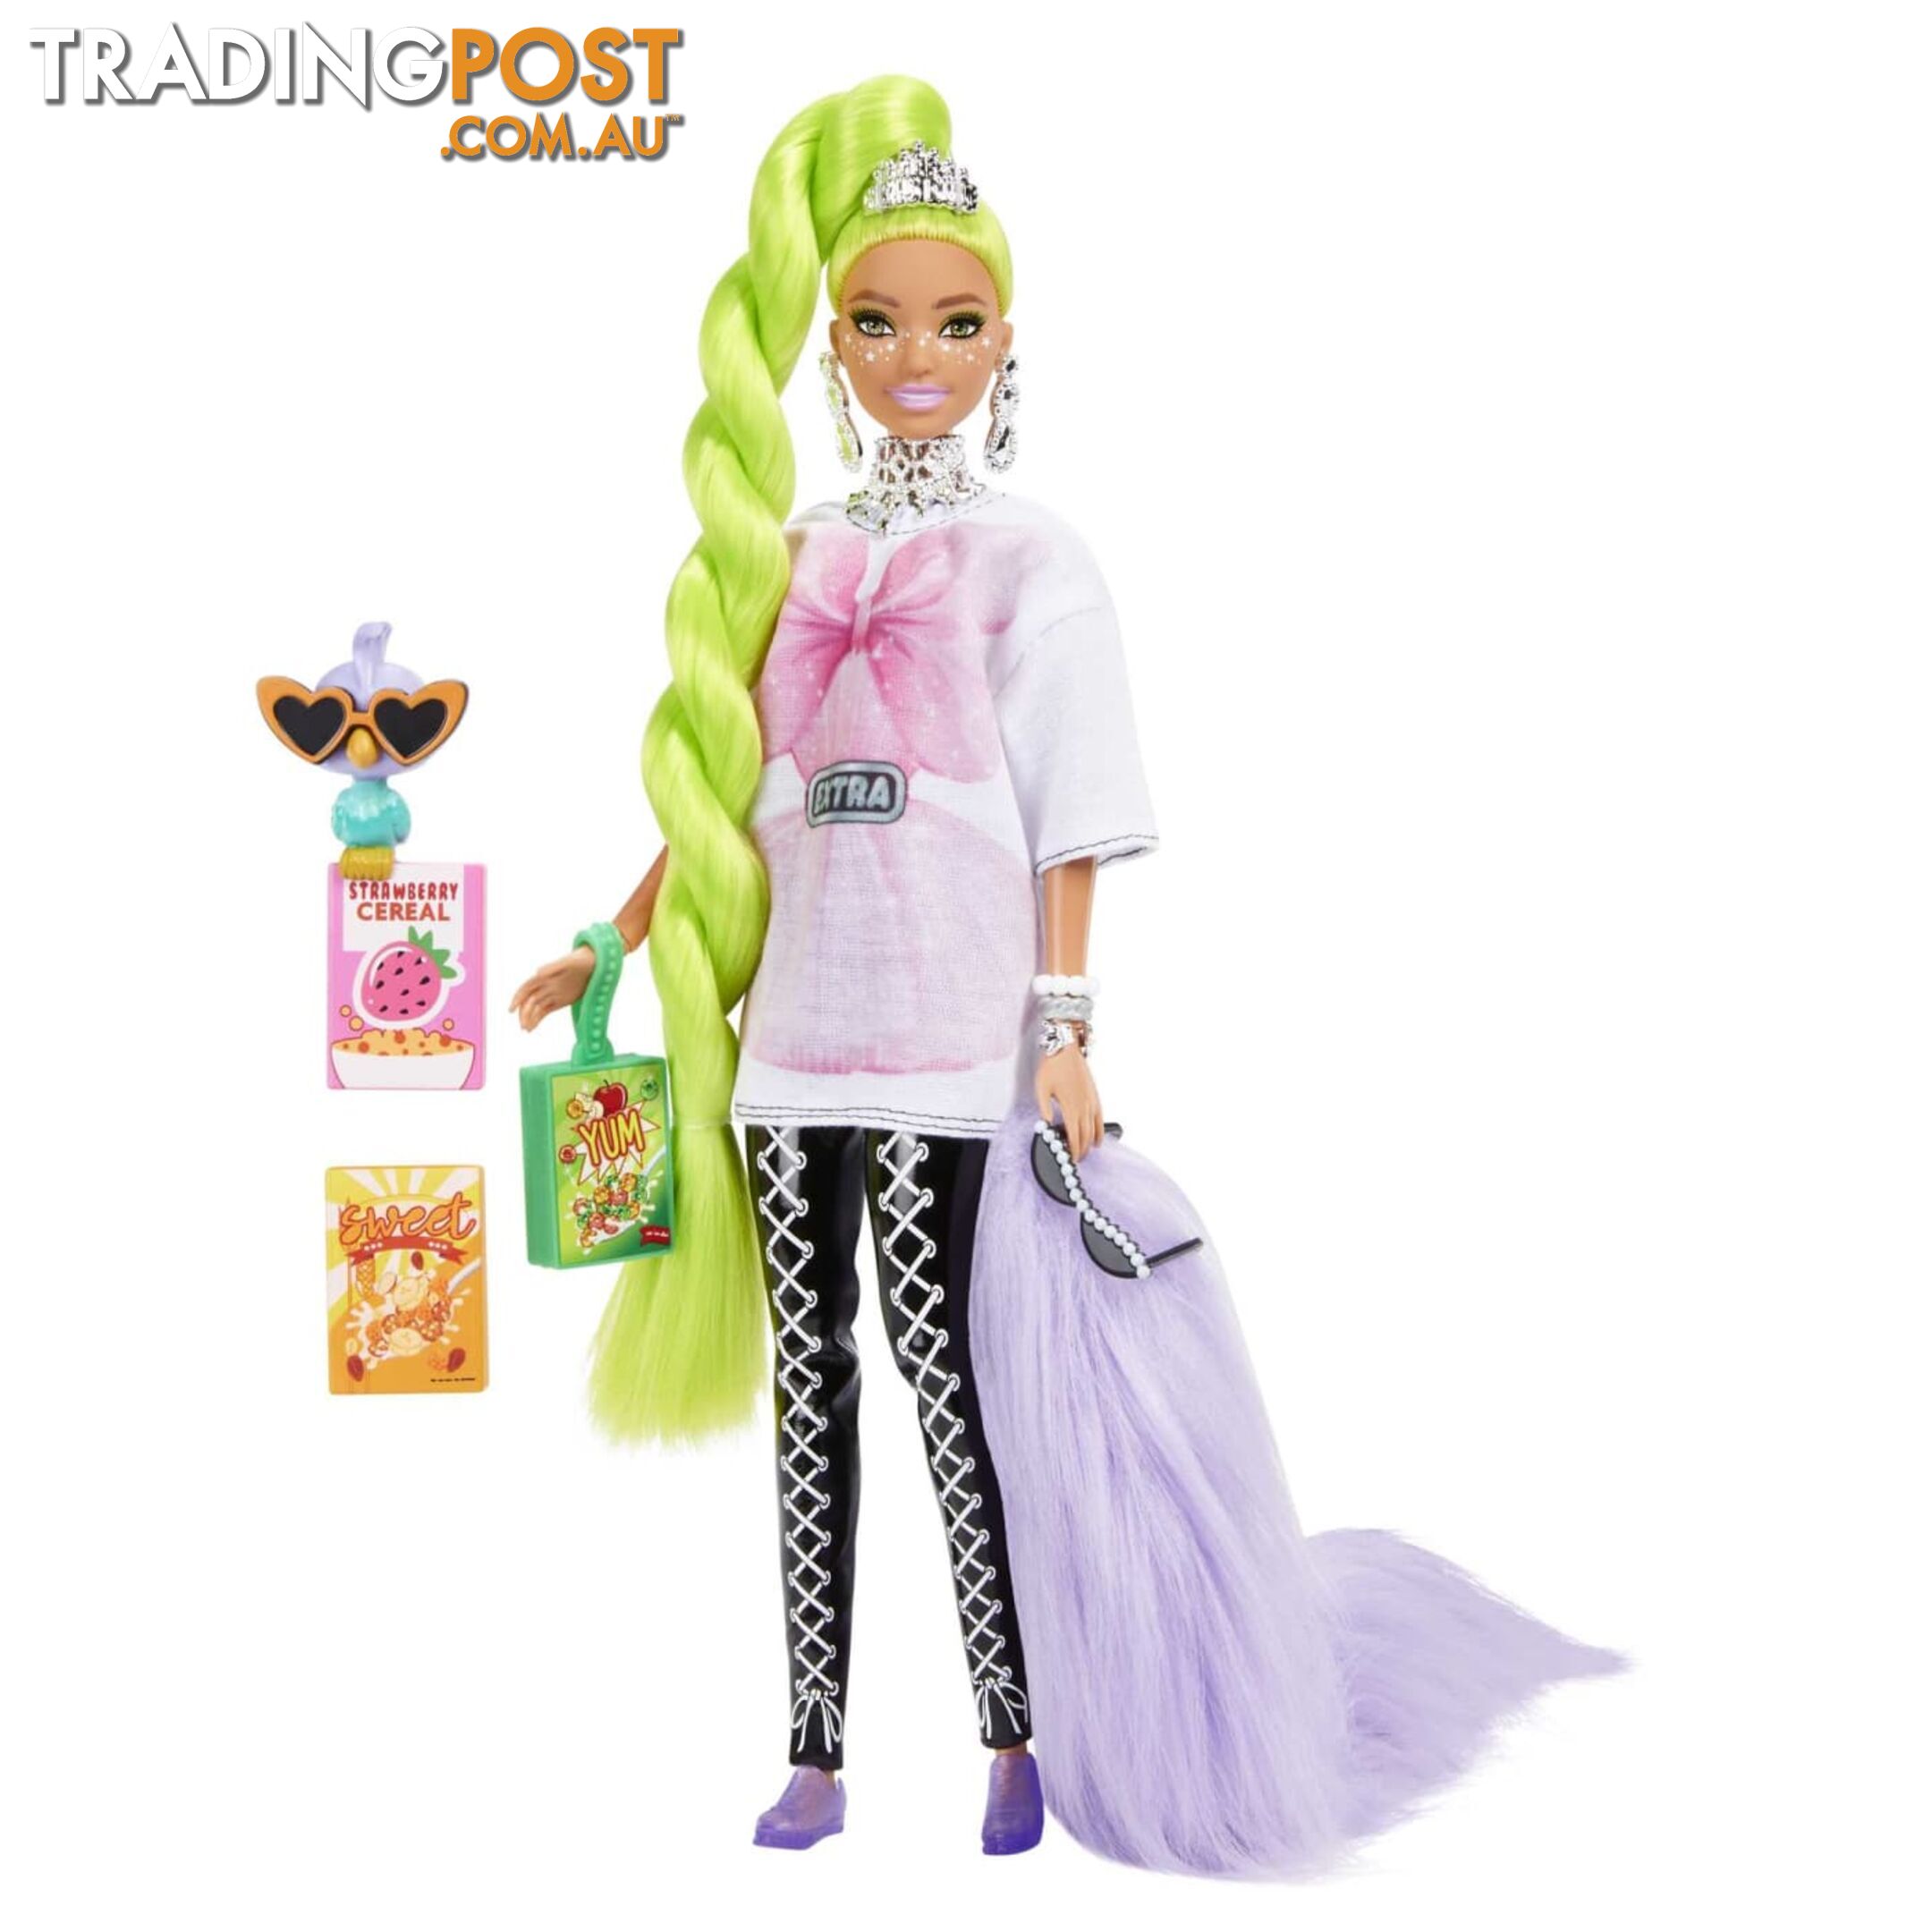 Barbie Doll And Accessories Barbie Extra Doll With Pet Parrot - MAHDJ44 - 194735024445